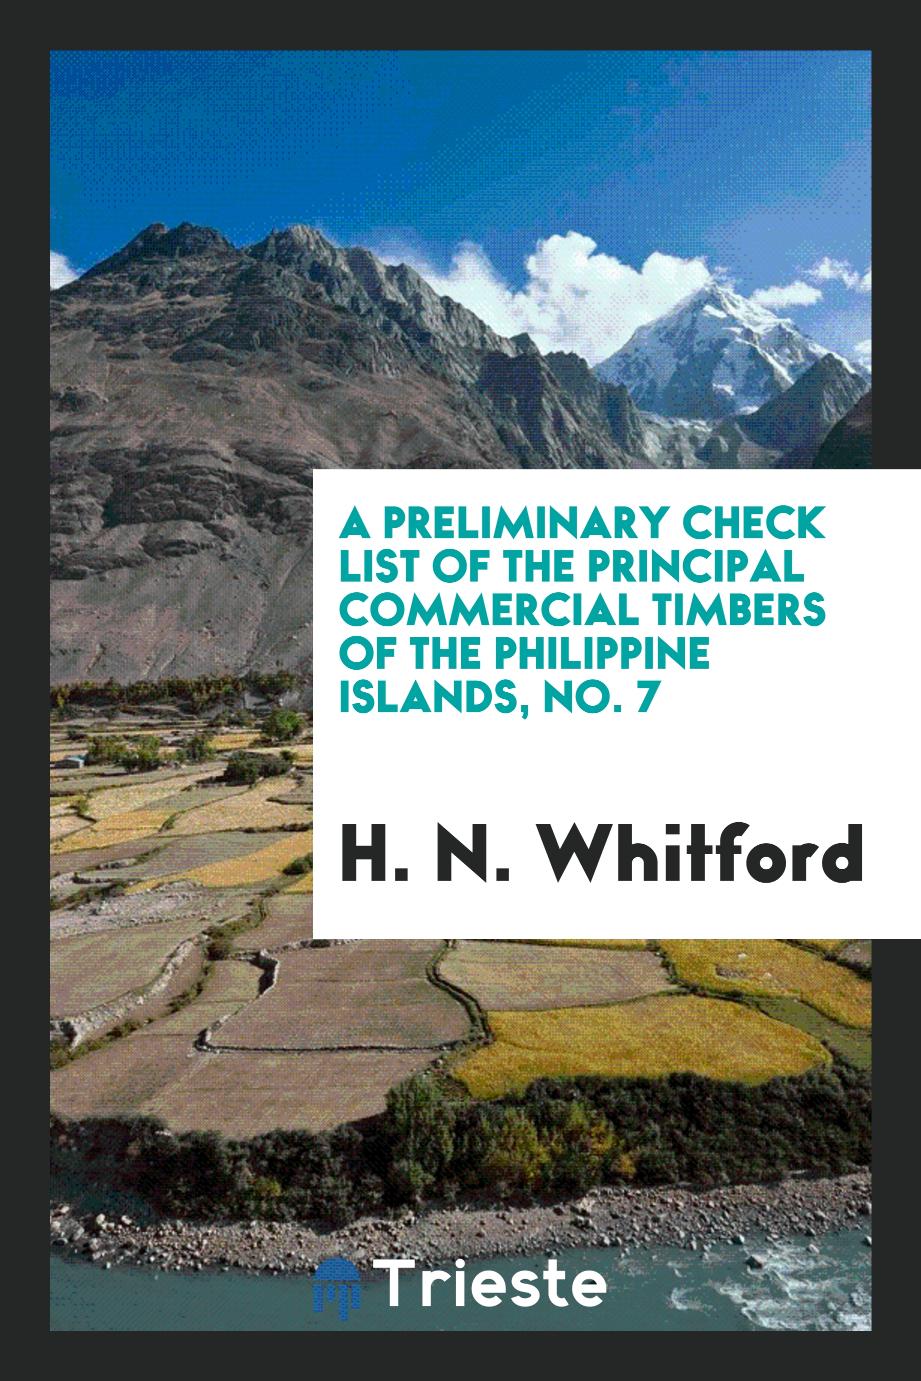 A Preliminary check list of the principal commercial timbers of the Philippine Islands, No. 7